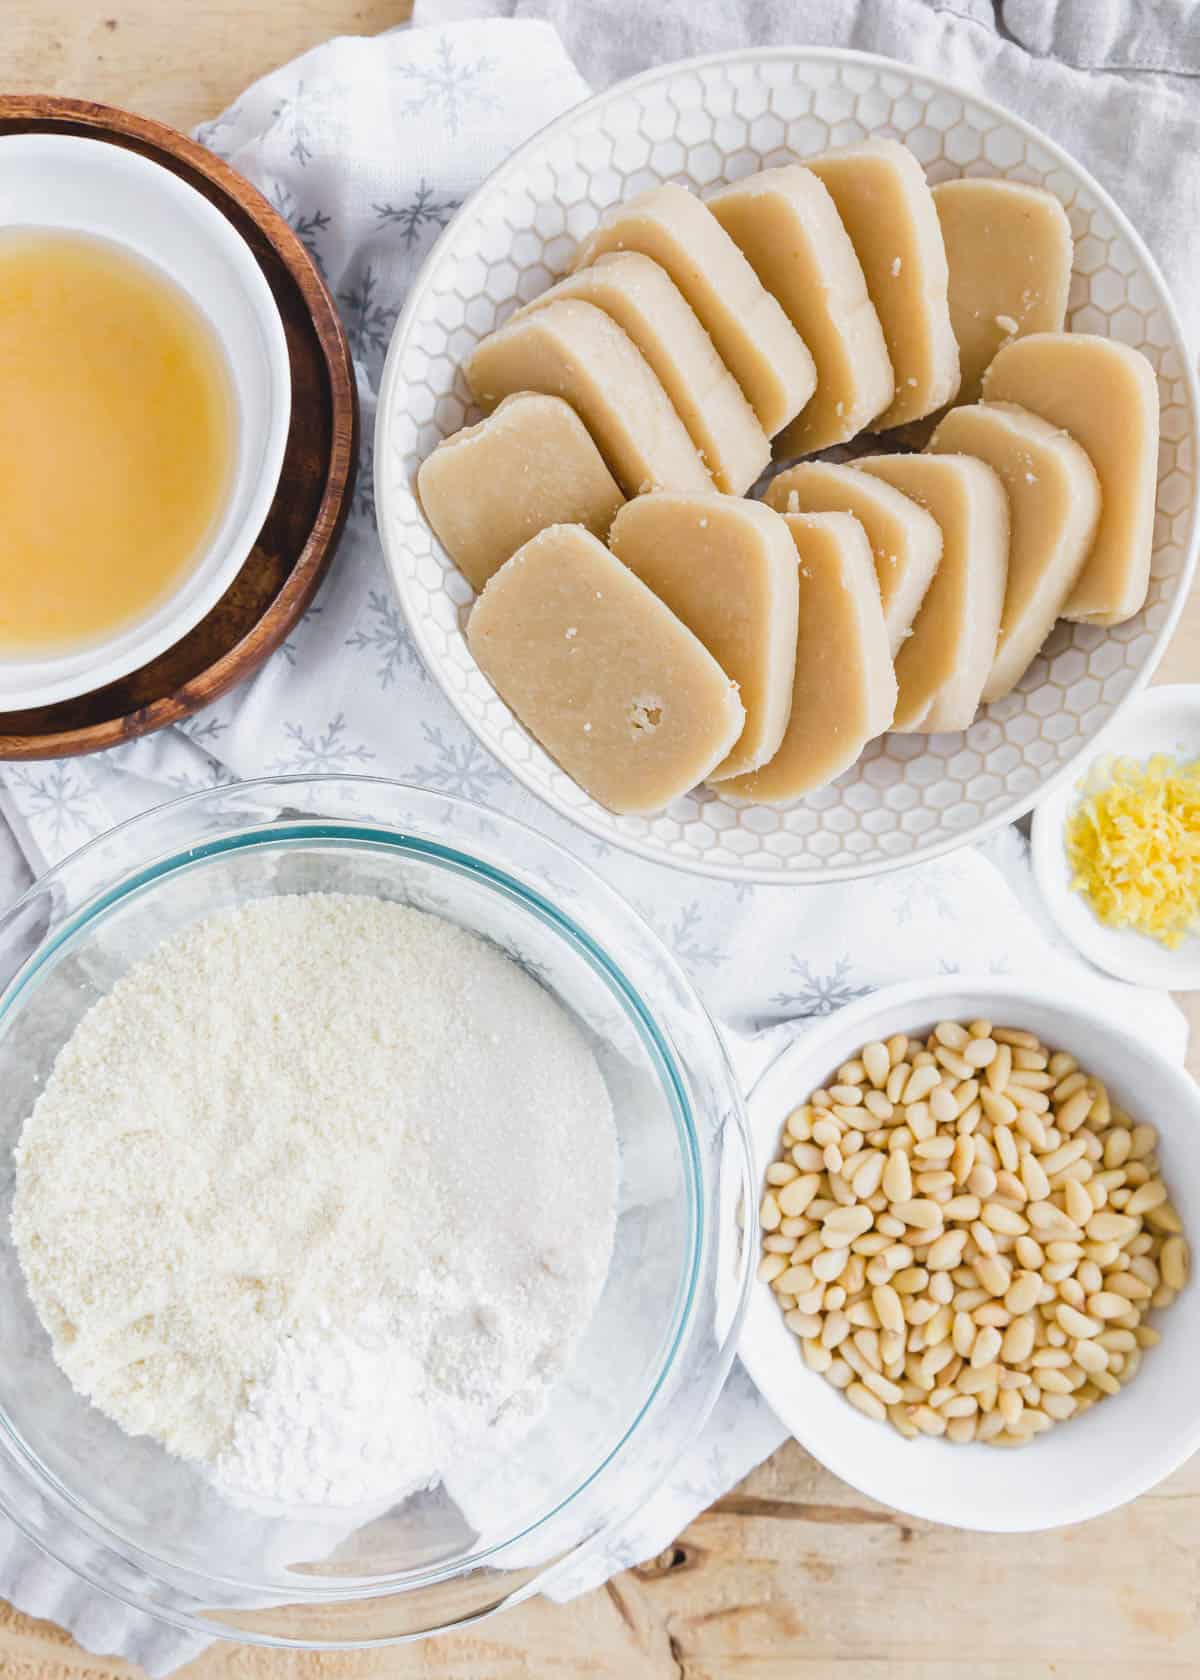 Ingredients to make pignoli cookies without egg whites in bowls including almond paste, lemon zest, pine nuts and a flour mixture.